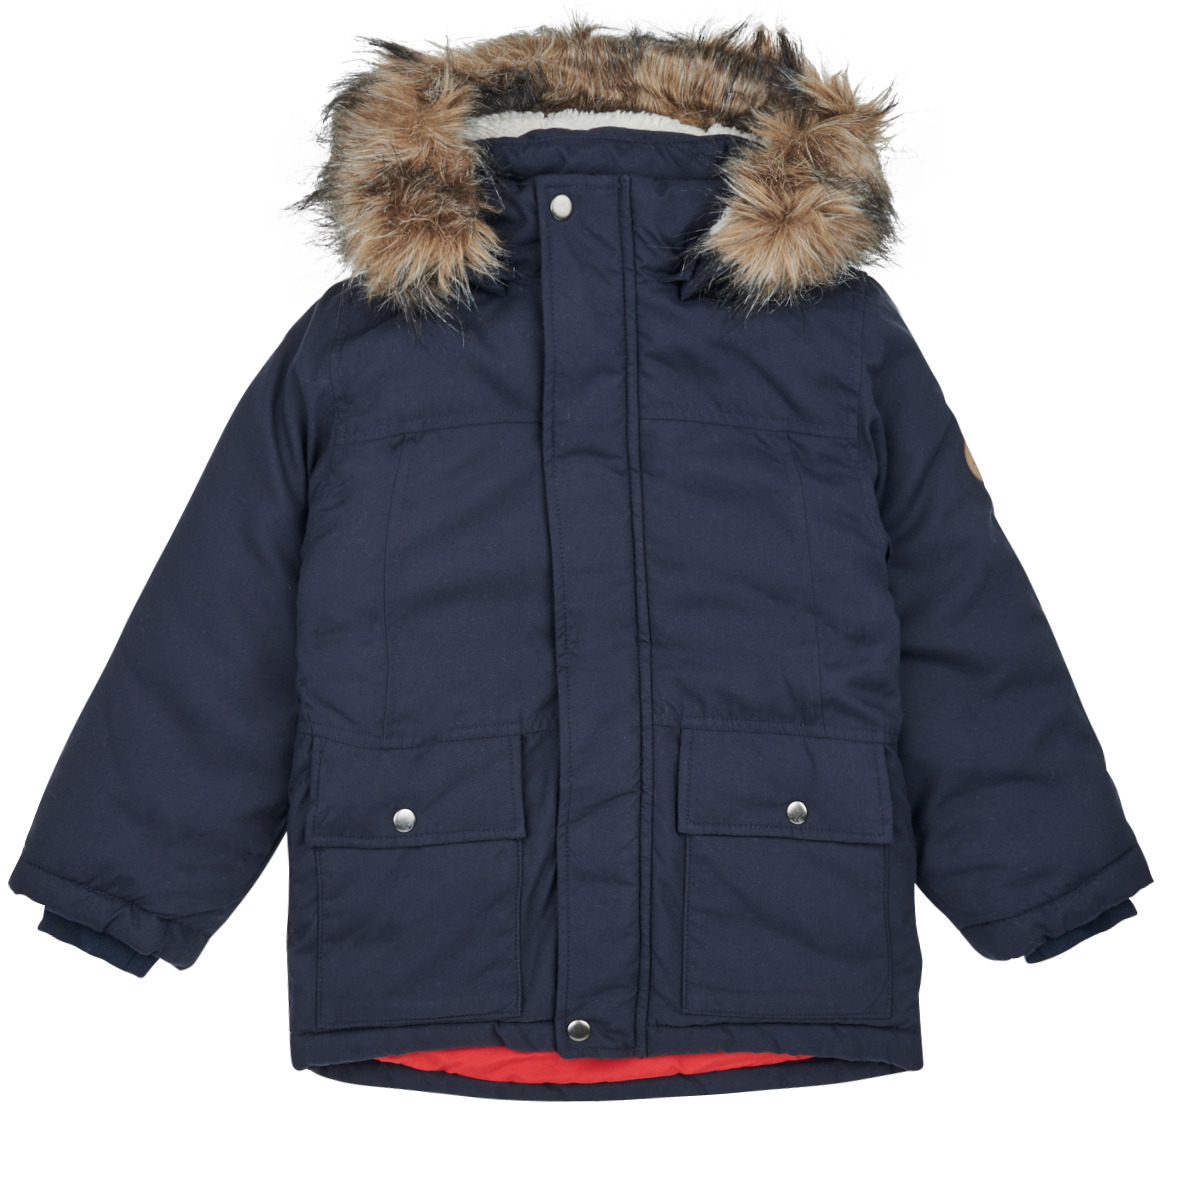 ! | PB delivery PARKA Parkas NET NKMMARLIN Free - Name JACKET it Child - Clothing Marine SOUTH Spartoo